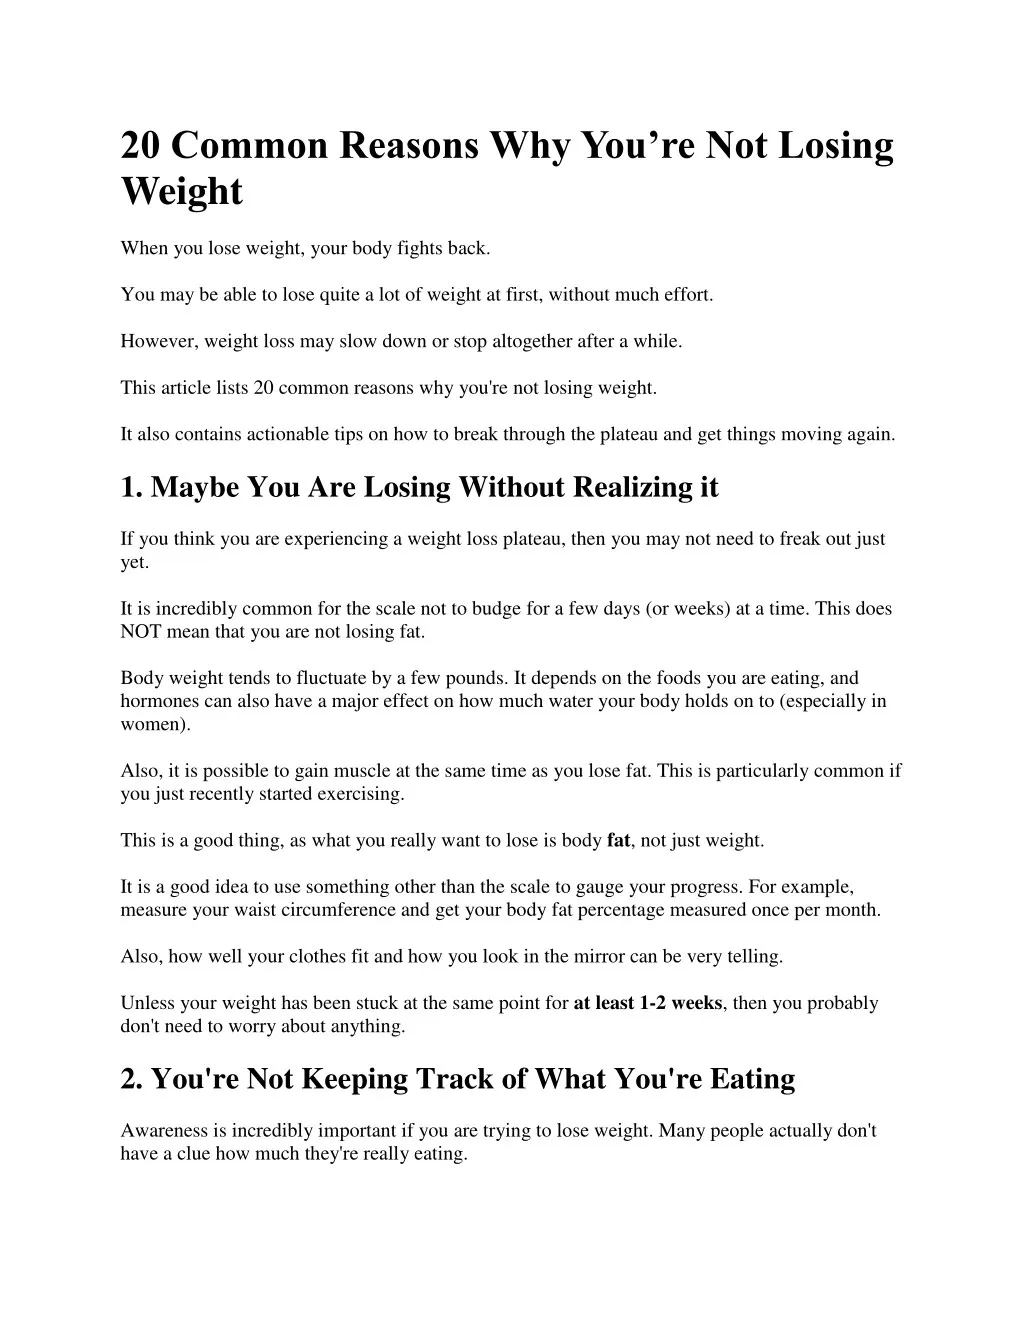 20 common reasons why you re not losing weight